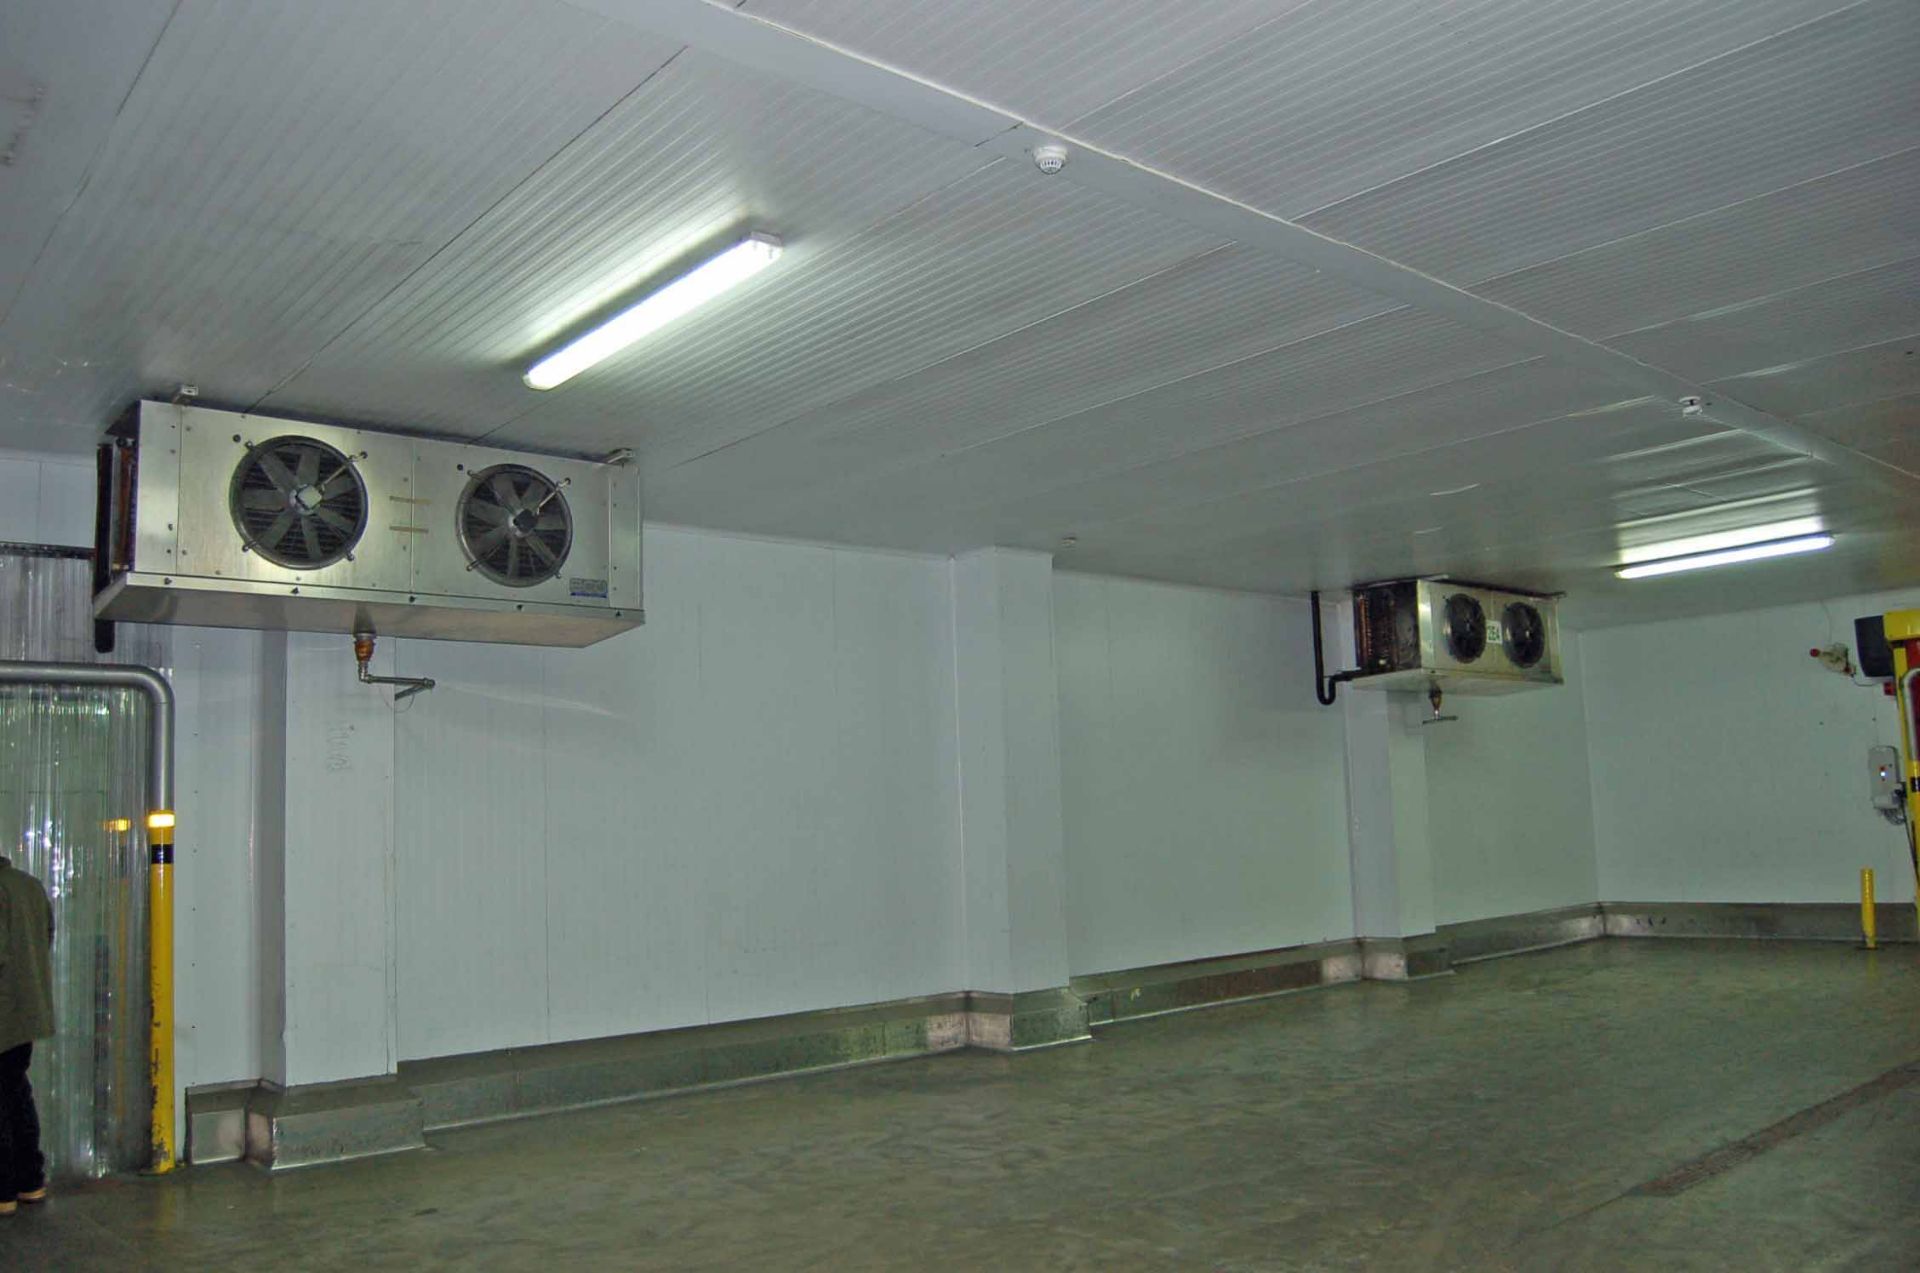 Two ECO COILS AND COOLERS Stainless Steel Clad Ceiling mounted Triple Fan Chiller Evaporator - Image 6 of 6